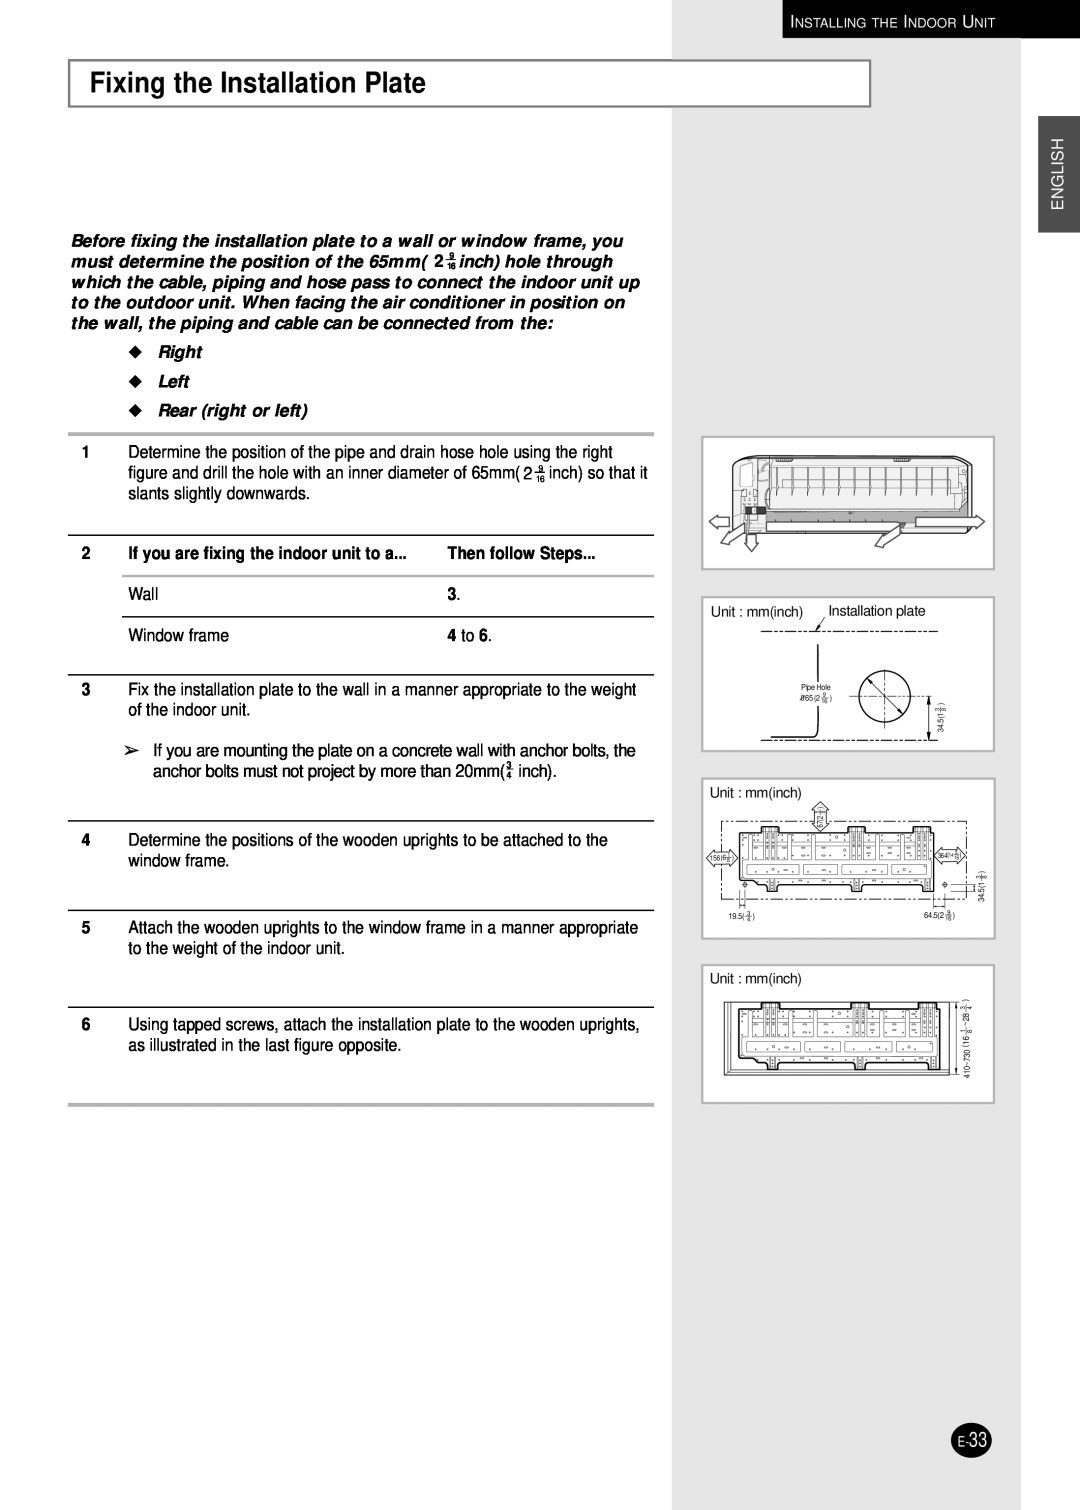 Samsung AQ30C1(2)BC installation manual Fixing the Installation Plate, Then follow Steps, Wall, Window frame, 4 to, English 